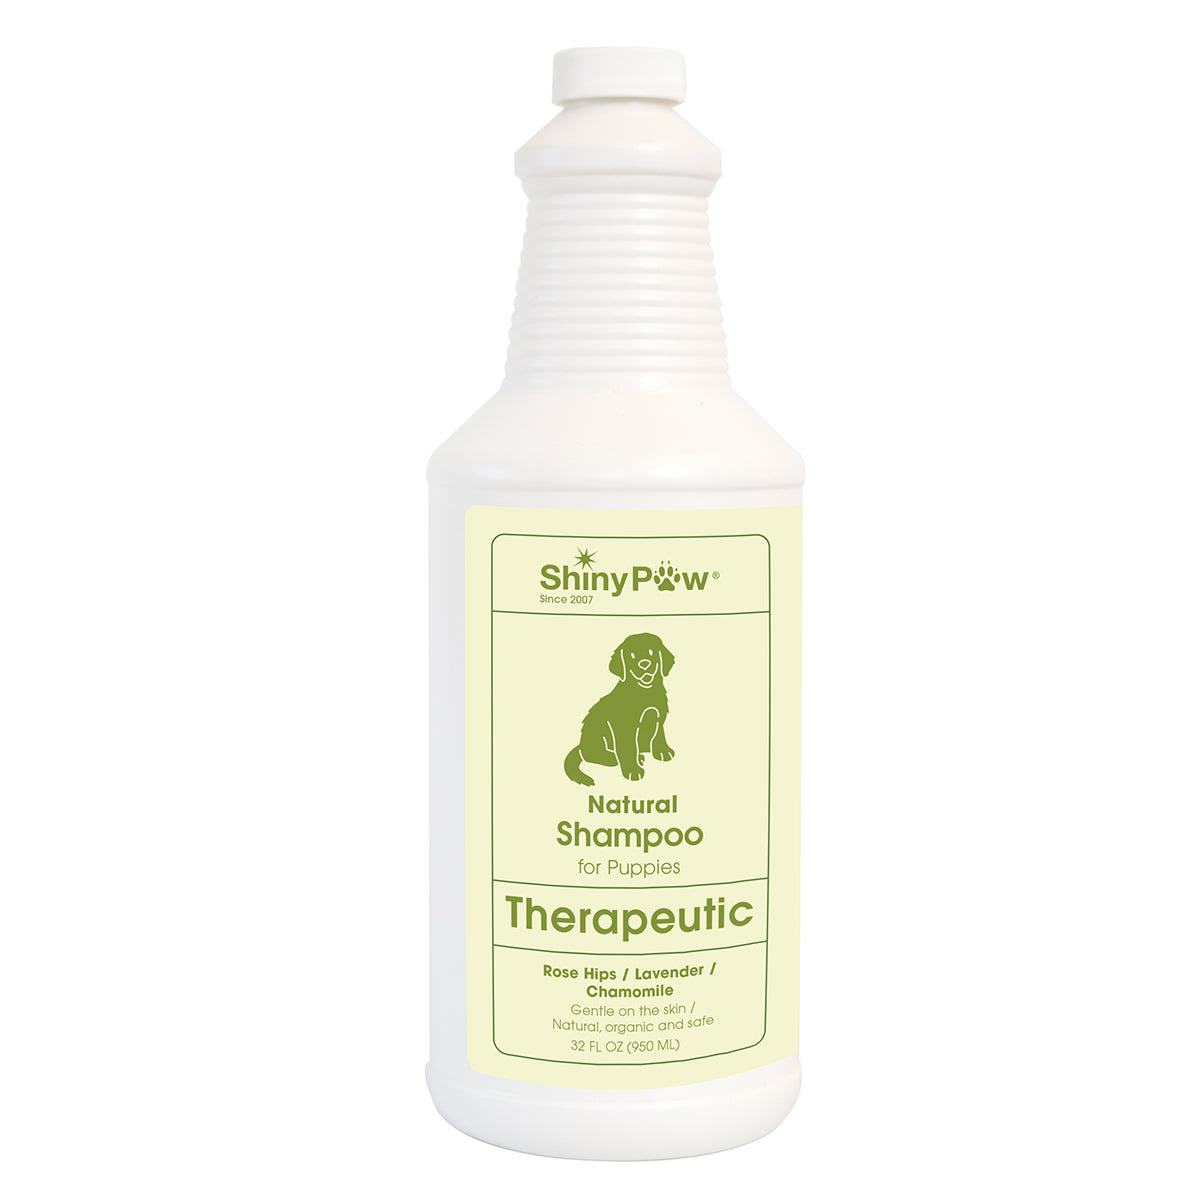 Shiny Paw Natural Therapeutic Shampoo Puppies Rose Hips Lavender Chamomile 32oz